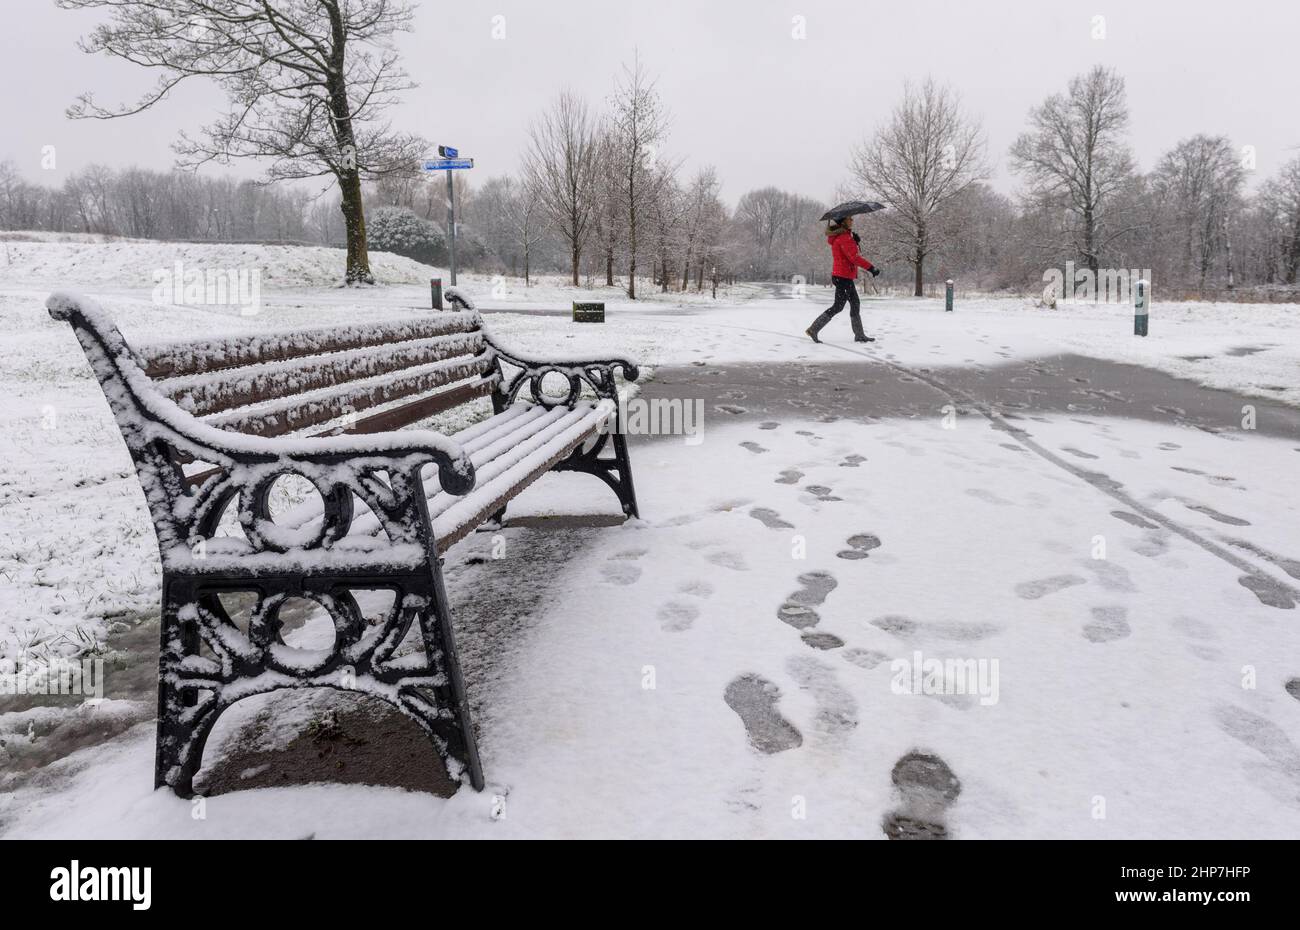 Bolton, Lancashire, UK, Saturday February 19, 2022. A woman walks through the snow in Leverhulme Park, Bolton, as the lastst weather front dumps a covering of snow in the North West of England. Credit: Paul Heyes/Alamy News Live Stock Photo